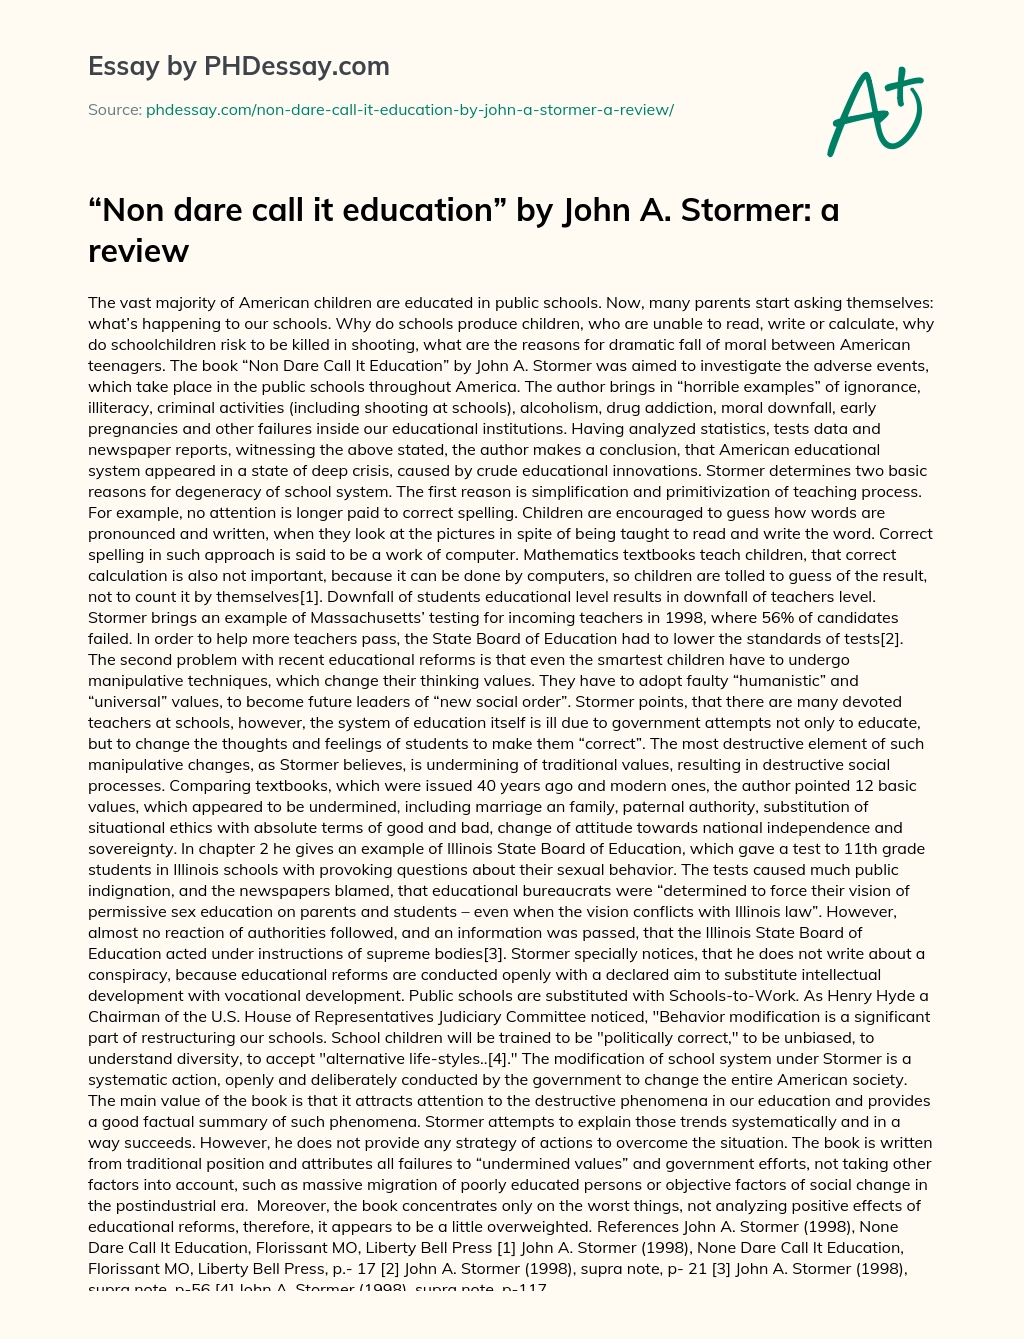 Non dare call it education by John A. Stormer: a review essay